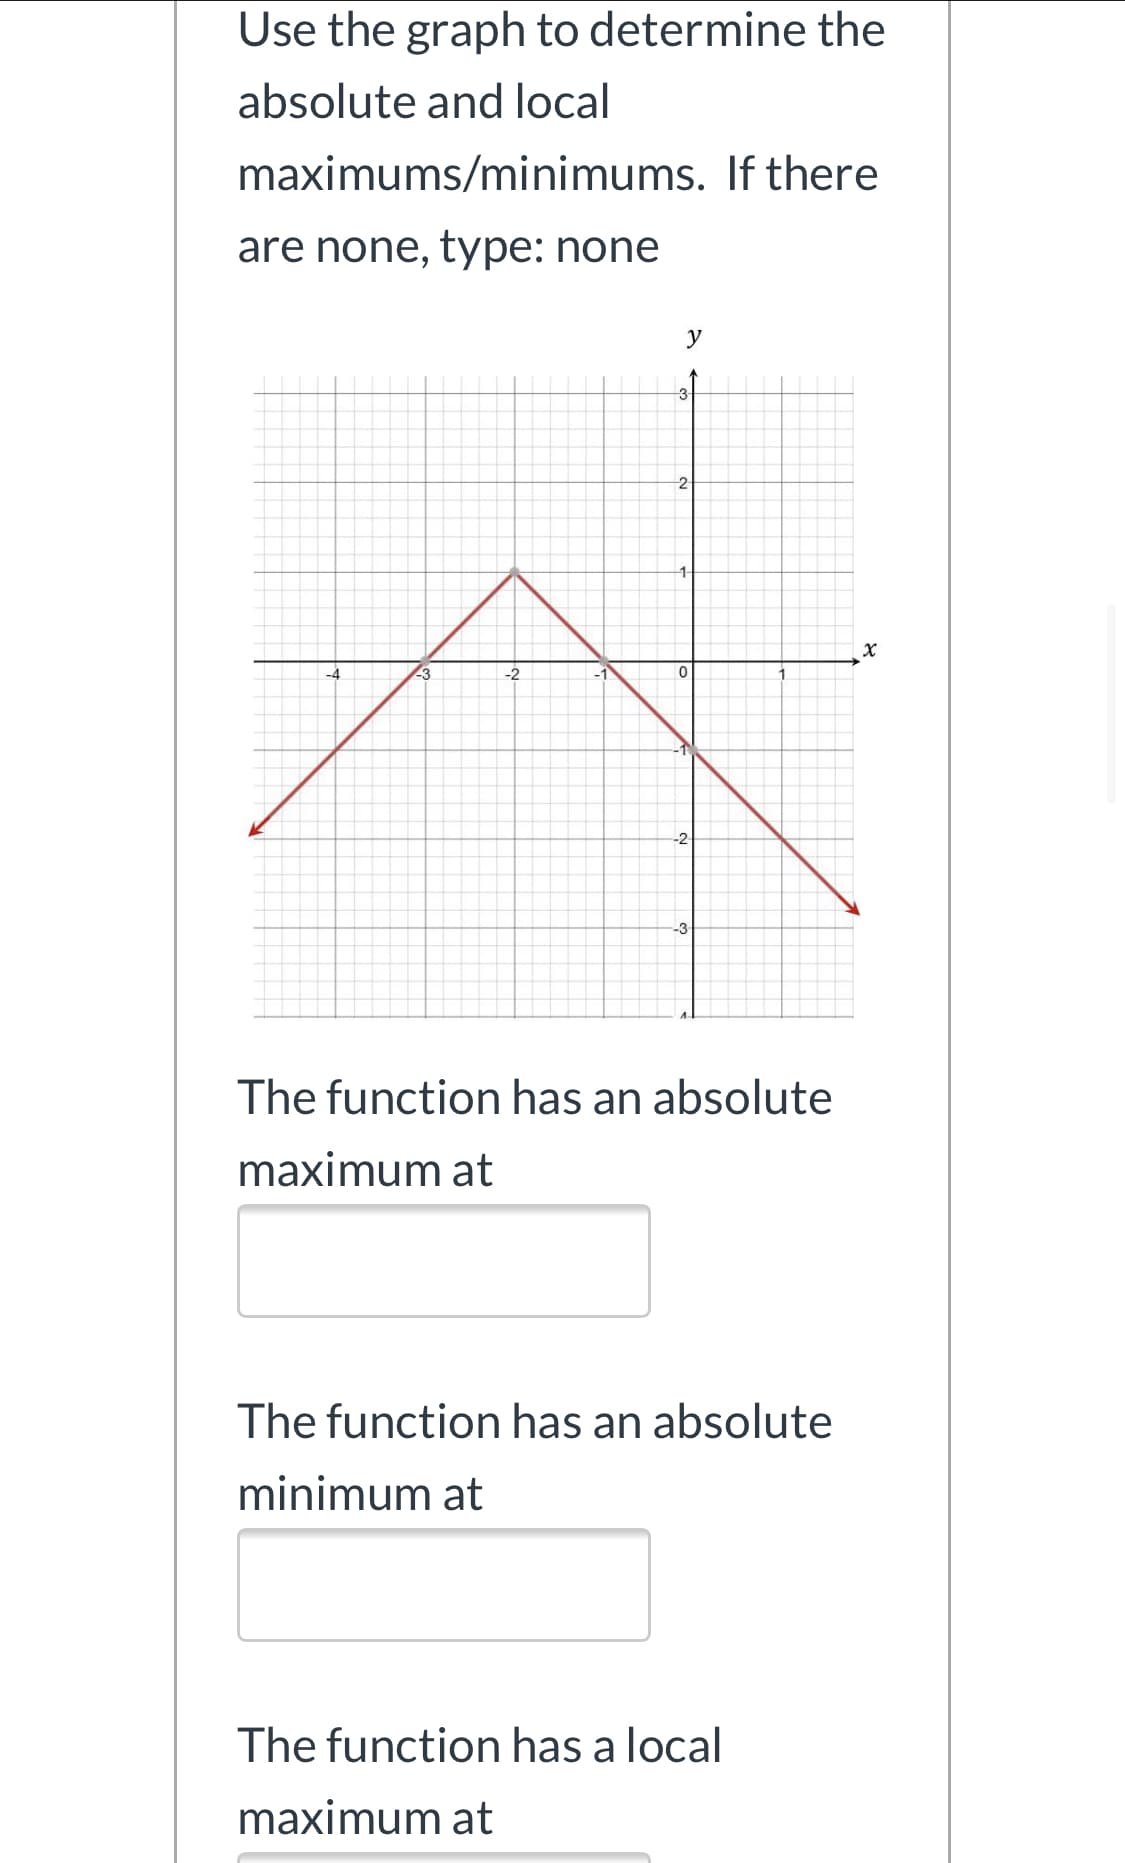 Use the graph to determine the
absolute and local
maximums/minimums. If there
are none, type: none
2-
23
-2
-3
The function has an absolute
maximum at
The function has an absolute
minimum at
The function has a local
maximum at
